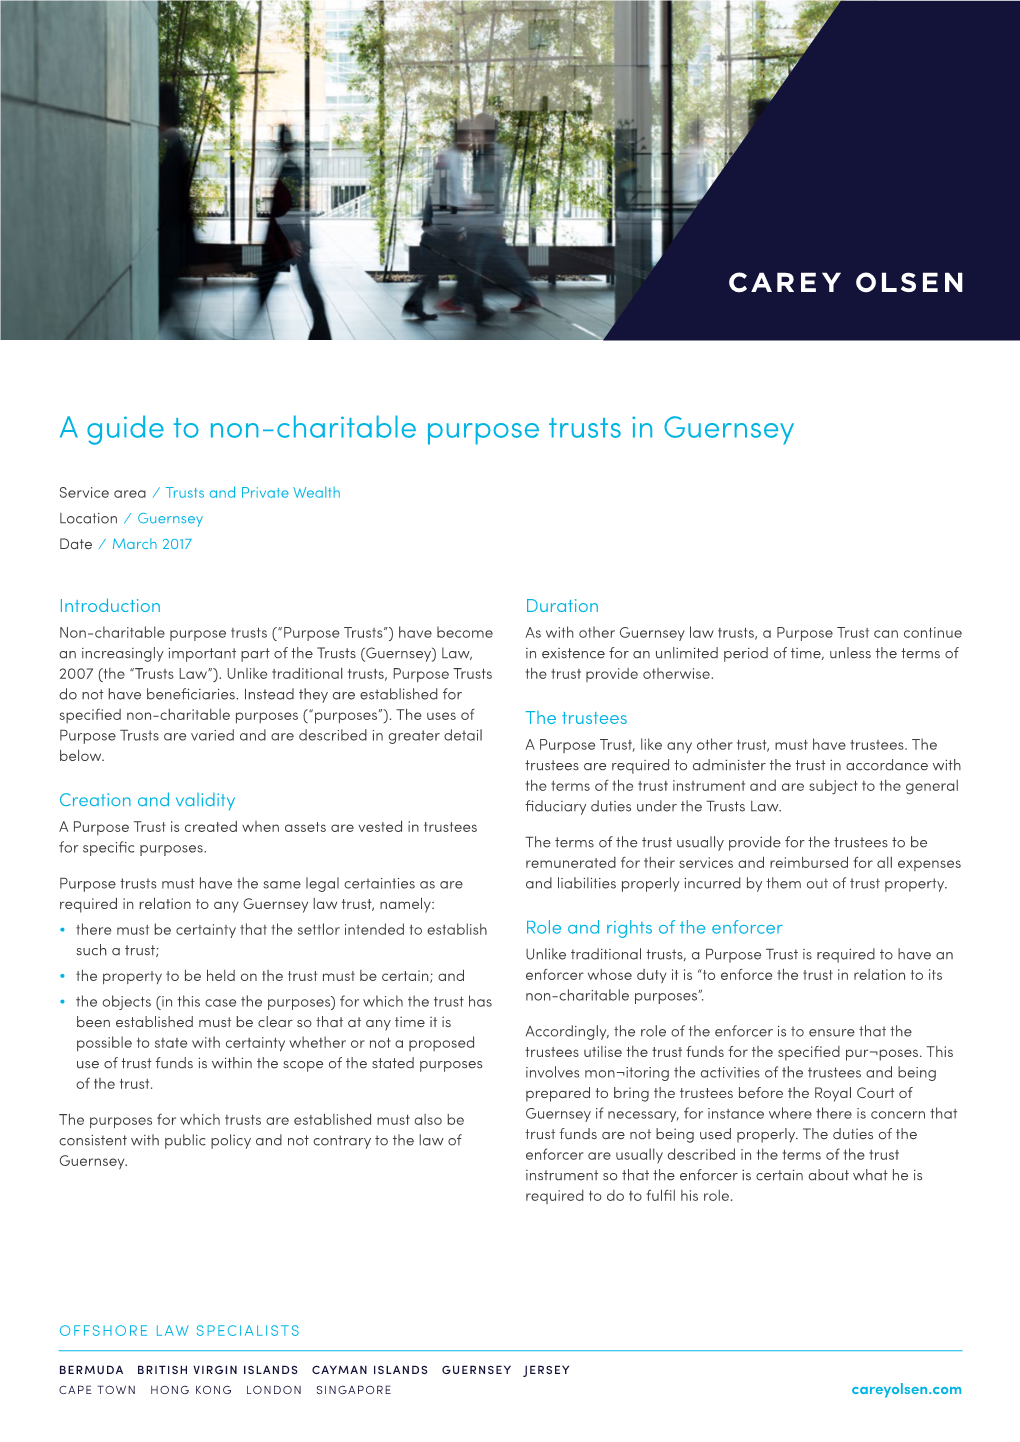 A Guide to Non-Charitable Purpose Trusts in Guernsey